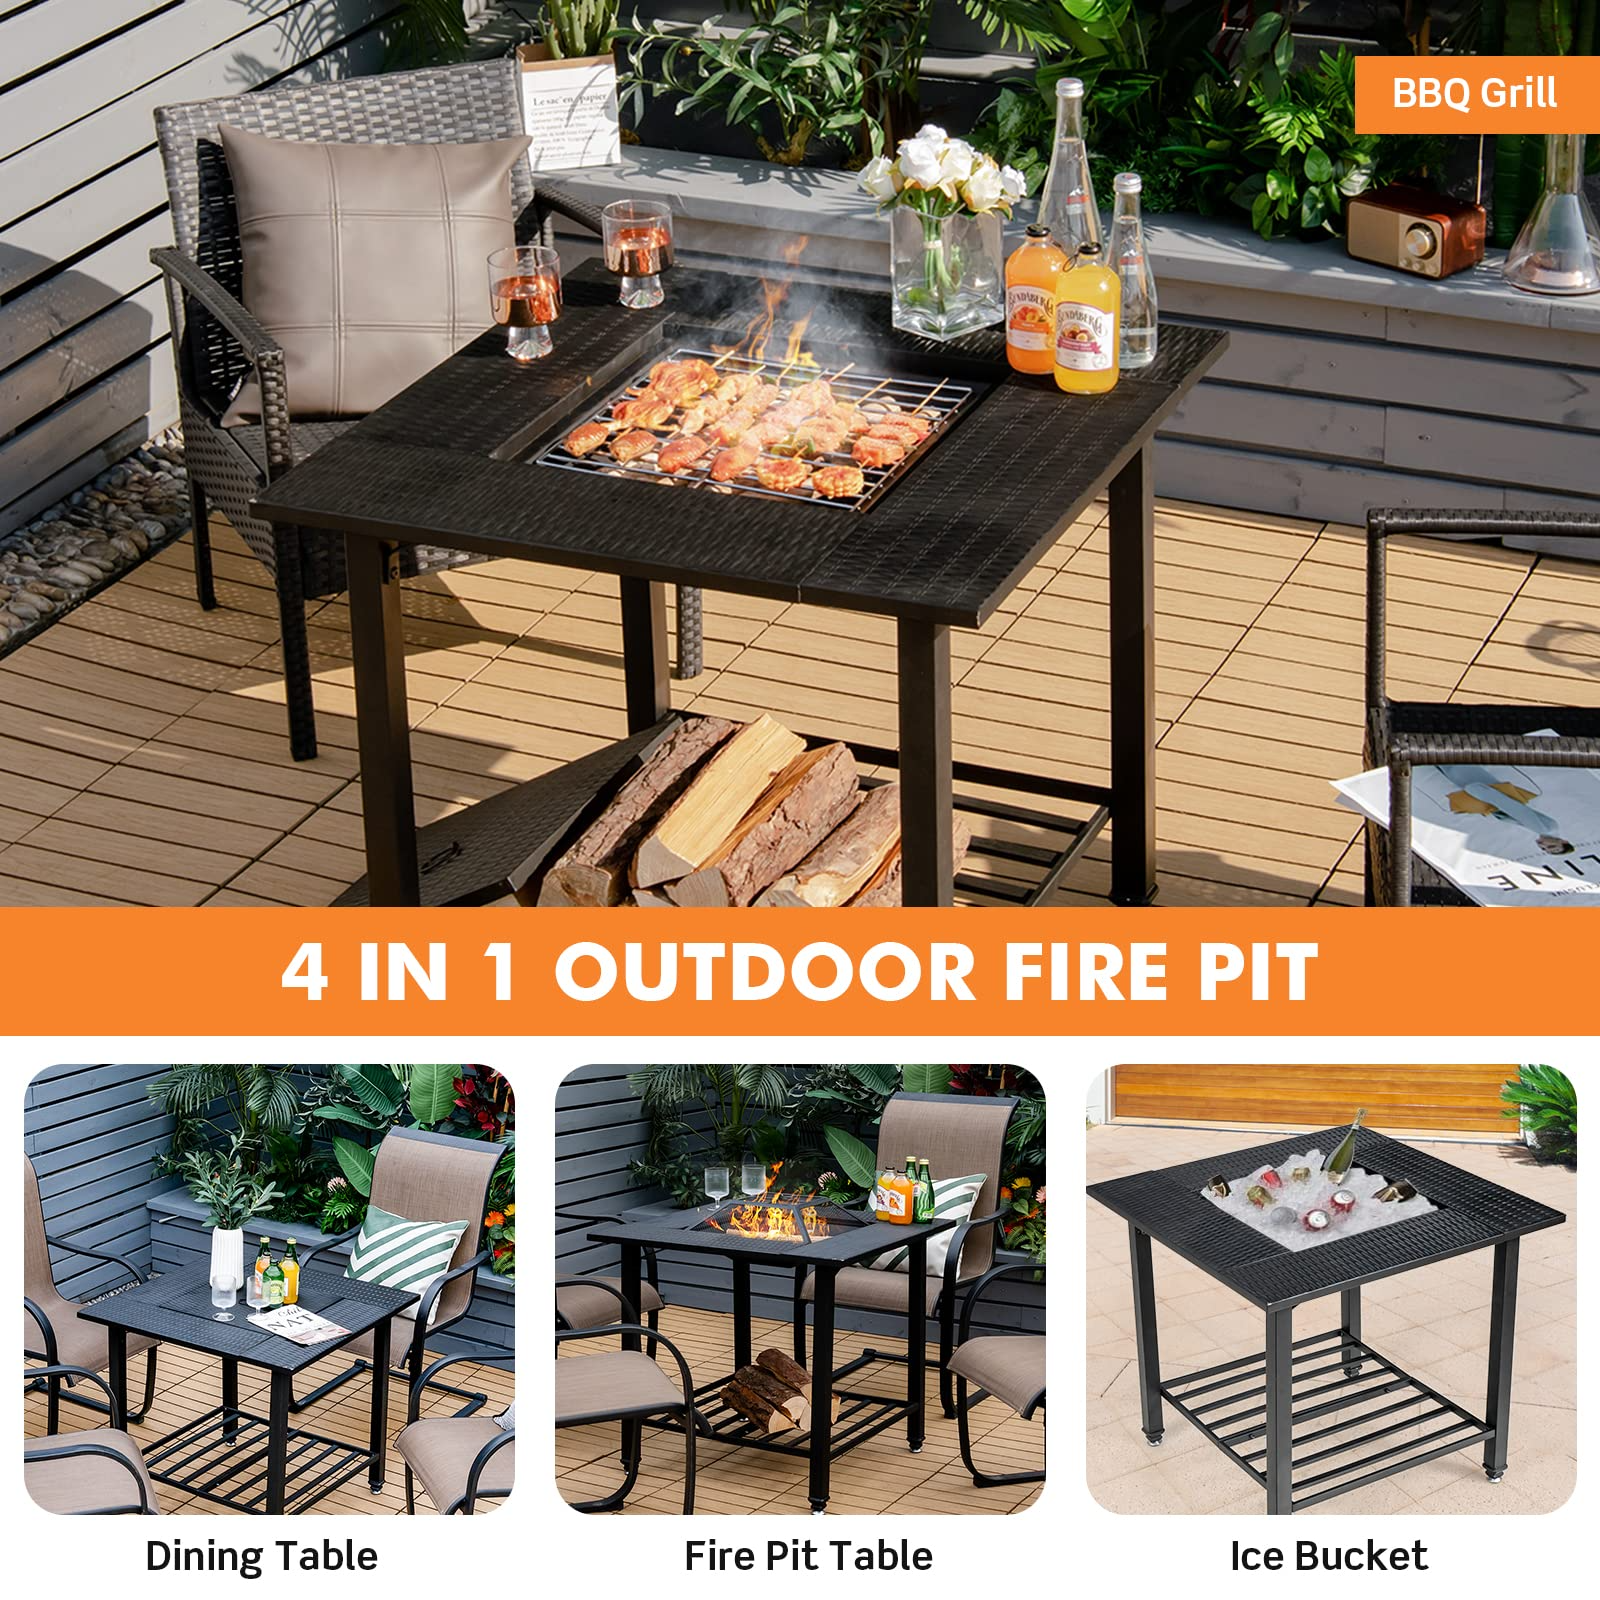 4-in-1 Wood Burning Fire Pit, Square Firepit Table with Mesh Cover